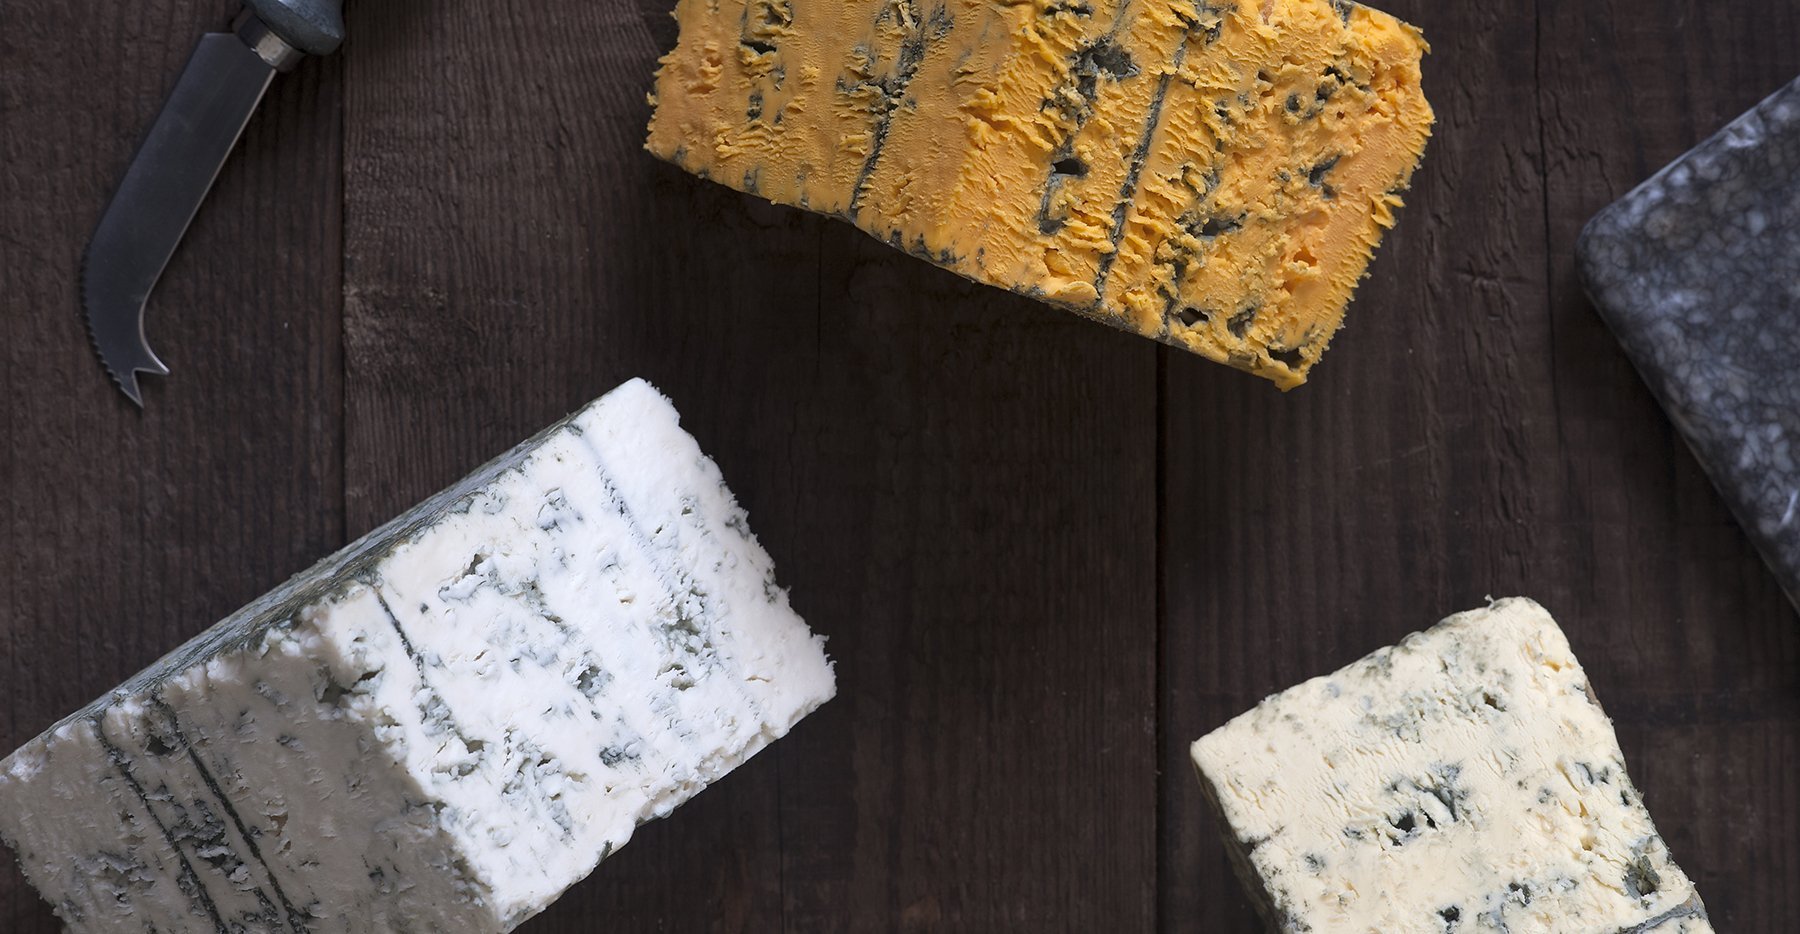 Lanchashire Blue Cheeses including Blacksticks Blue, Stratford Blue and Beacon Blue